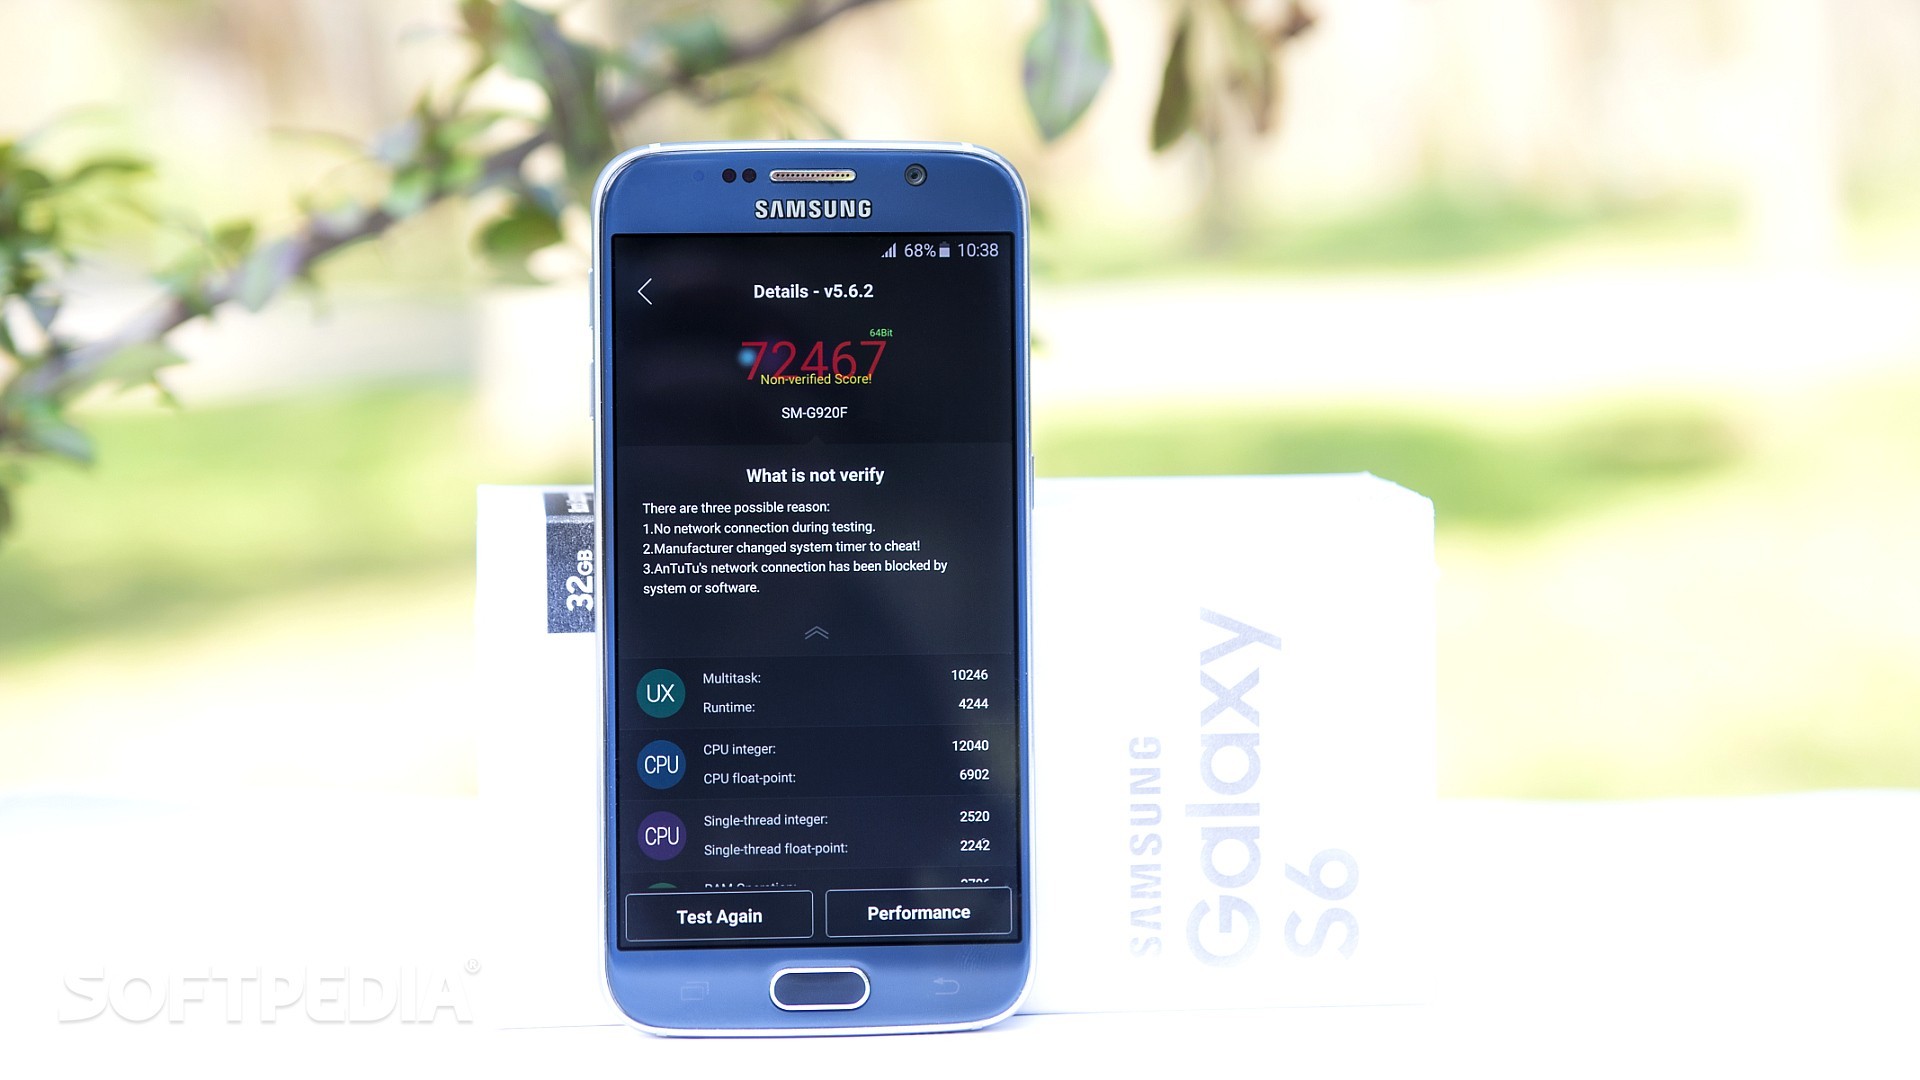 Samsung Starts Pushing Android 70 Nougat Update To Galaxy S6 And S6